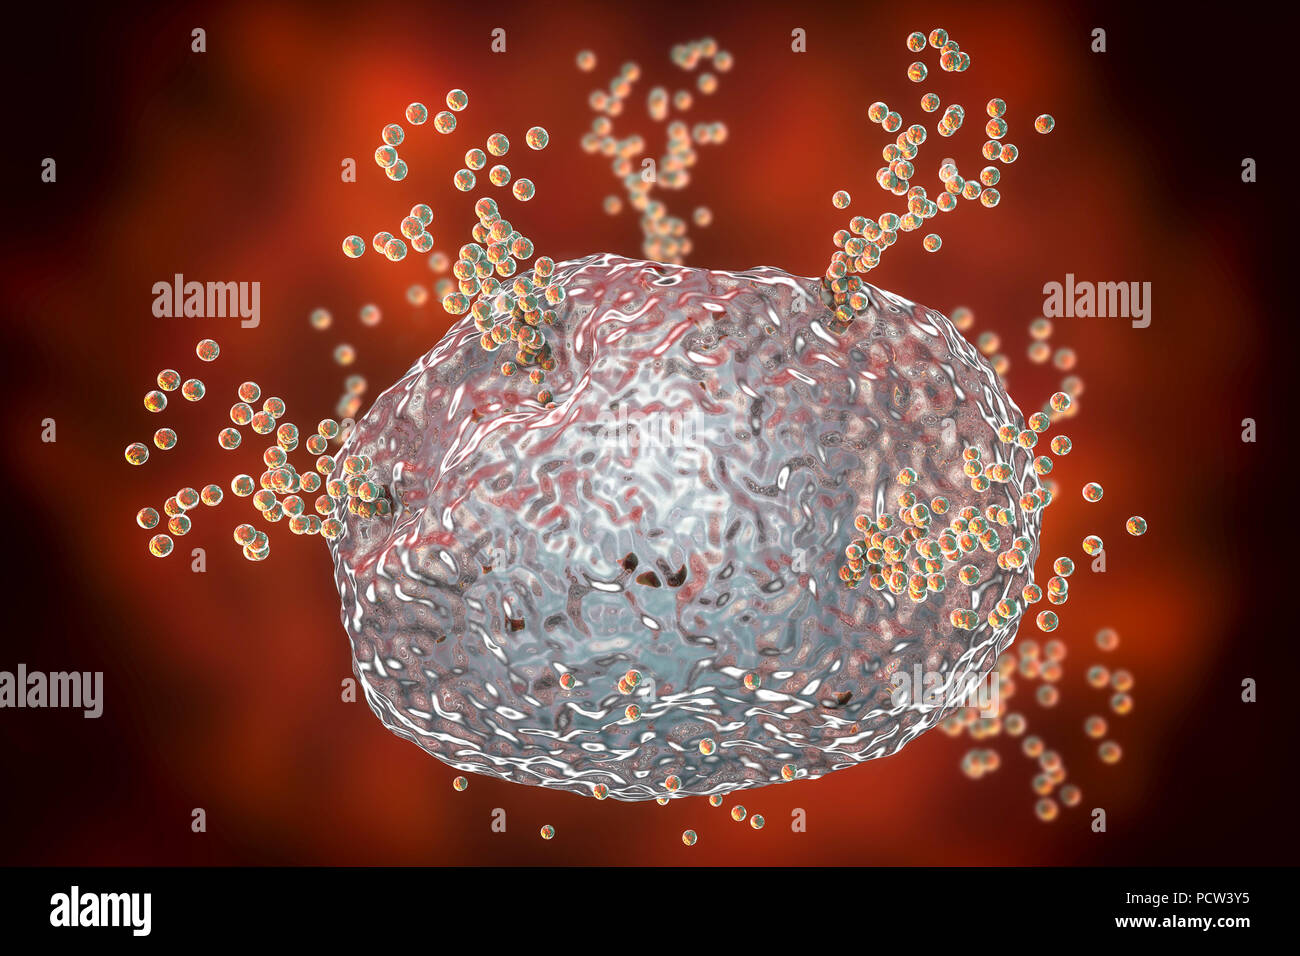 Mast cell releasing histamine during an allergic response,computer illustration.Mast cells are a type of leucocyte (white blood cell).They contain the chemical mediators histamine,serotonin and heparin.Histamine is released from mast cells in response to an allergen,causing a localized inflammatory immune response.When an allergen is encountered,B cells (not seen) produce antibodies which bind to protein receptor molecules on the surface of the mast cell.When two antibodies are cross-linked with an antigen the cell is activated to release its histamine by exocytosis. Stock Photo